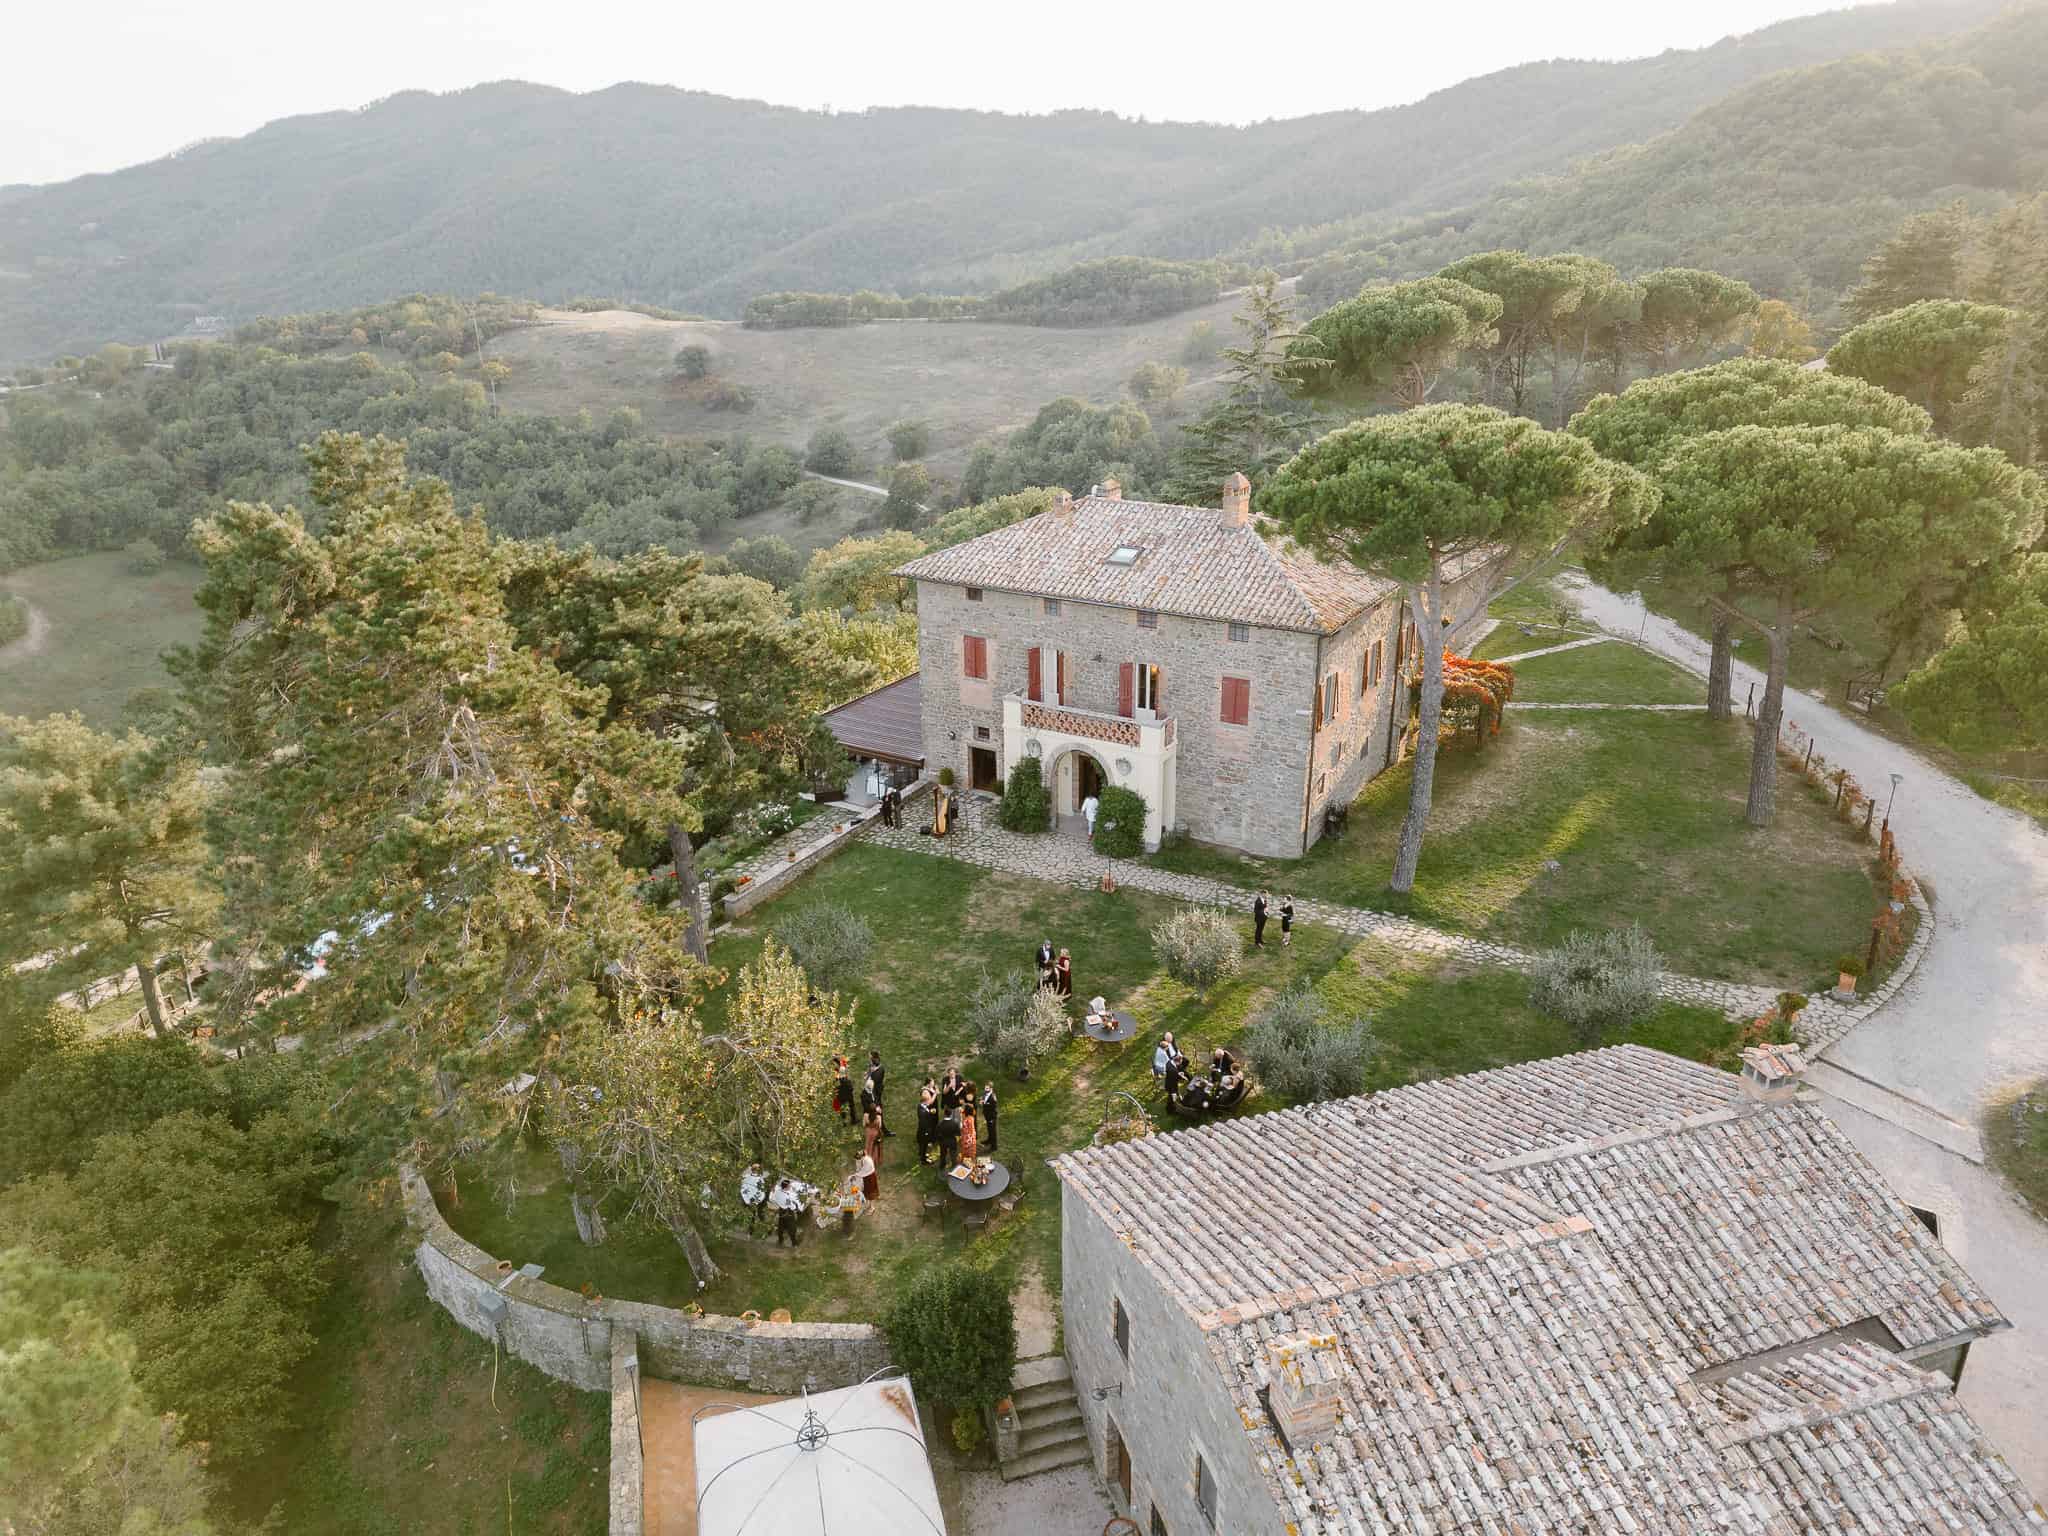 Casa Bruciata from above during a wedding in Umbria